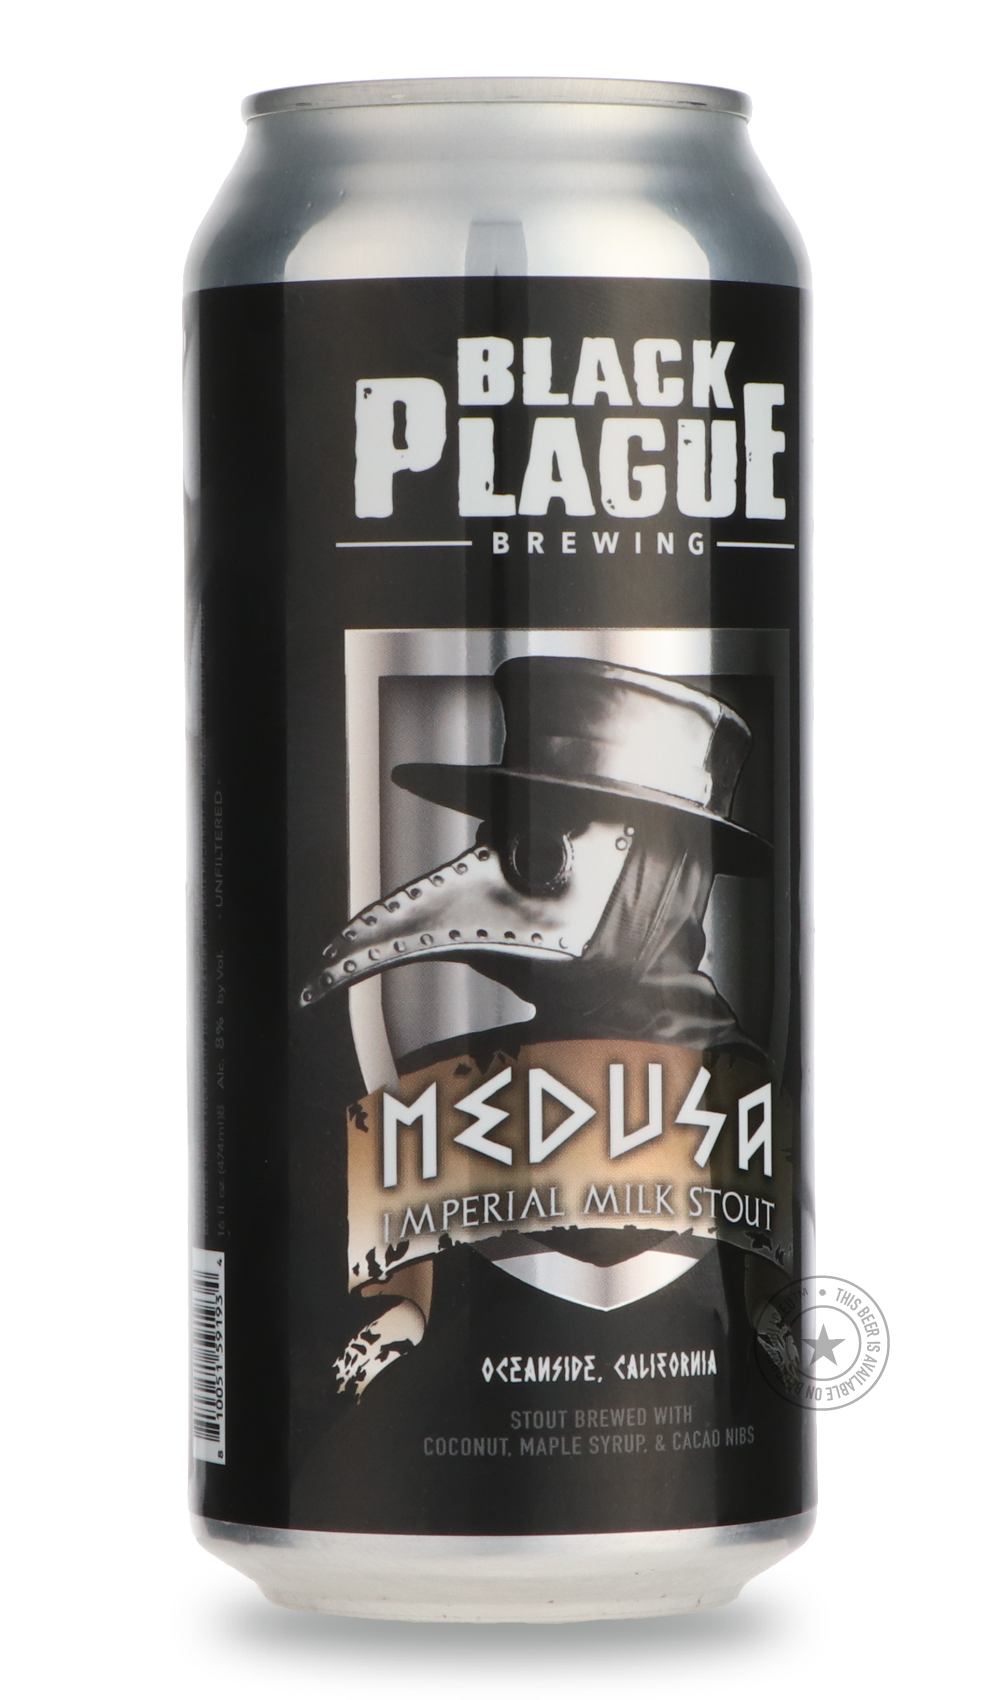 -Black Plague- Medusa-Stout & Porter- Only @ Beer Republic - The best online beer store for American & Canadian craft beer - Buy beer online from the USA and Canada - Bier online kopen - Amerikaans bier kopen - Craft beer store - Craft beer kopen - Amerikanisch bier kaufen - Bier online kaufen - Acheter biere online - IPA - Stout - Porter - New England IPA - Hazy IPA - Imperial Stout - Barrel Aged - Barrel Aged Imperial Stout - Brown - Dark beer - Blond - Blonde - Pilsner - Lager - Wheat - Weizen - Amber - 